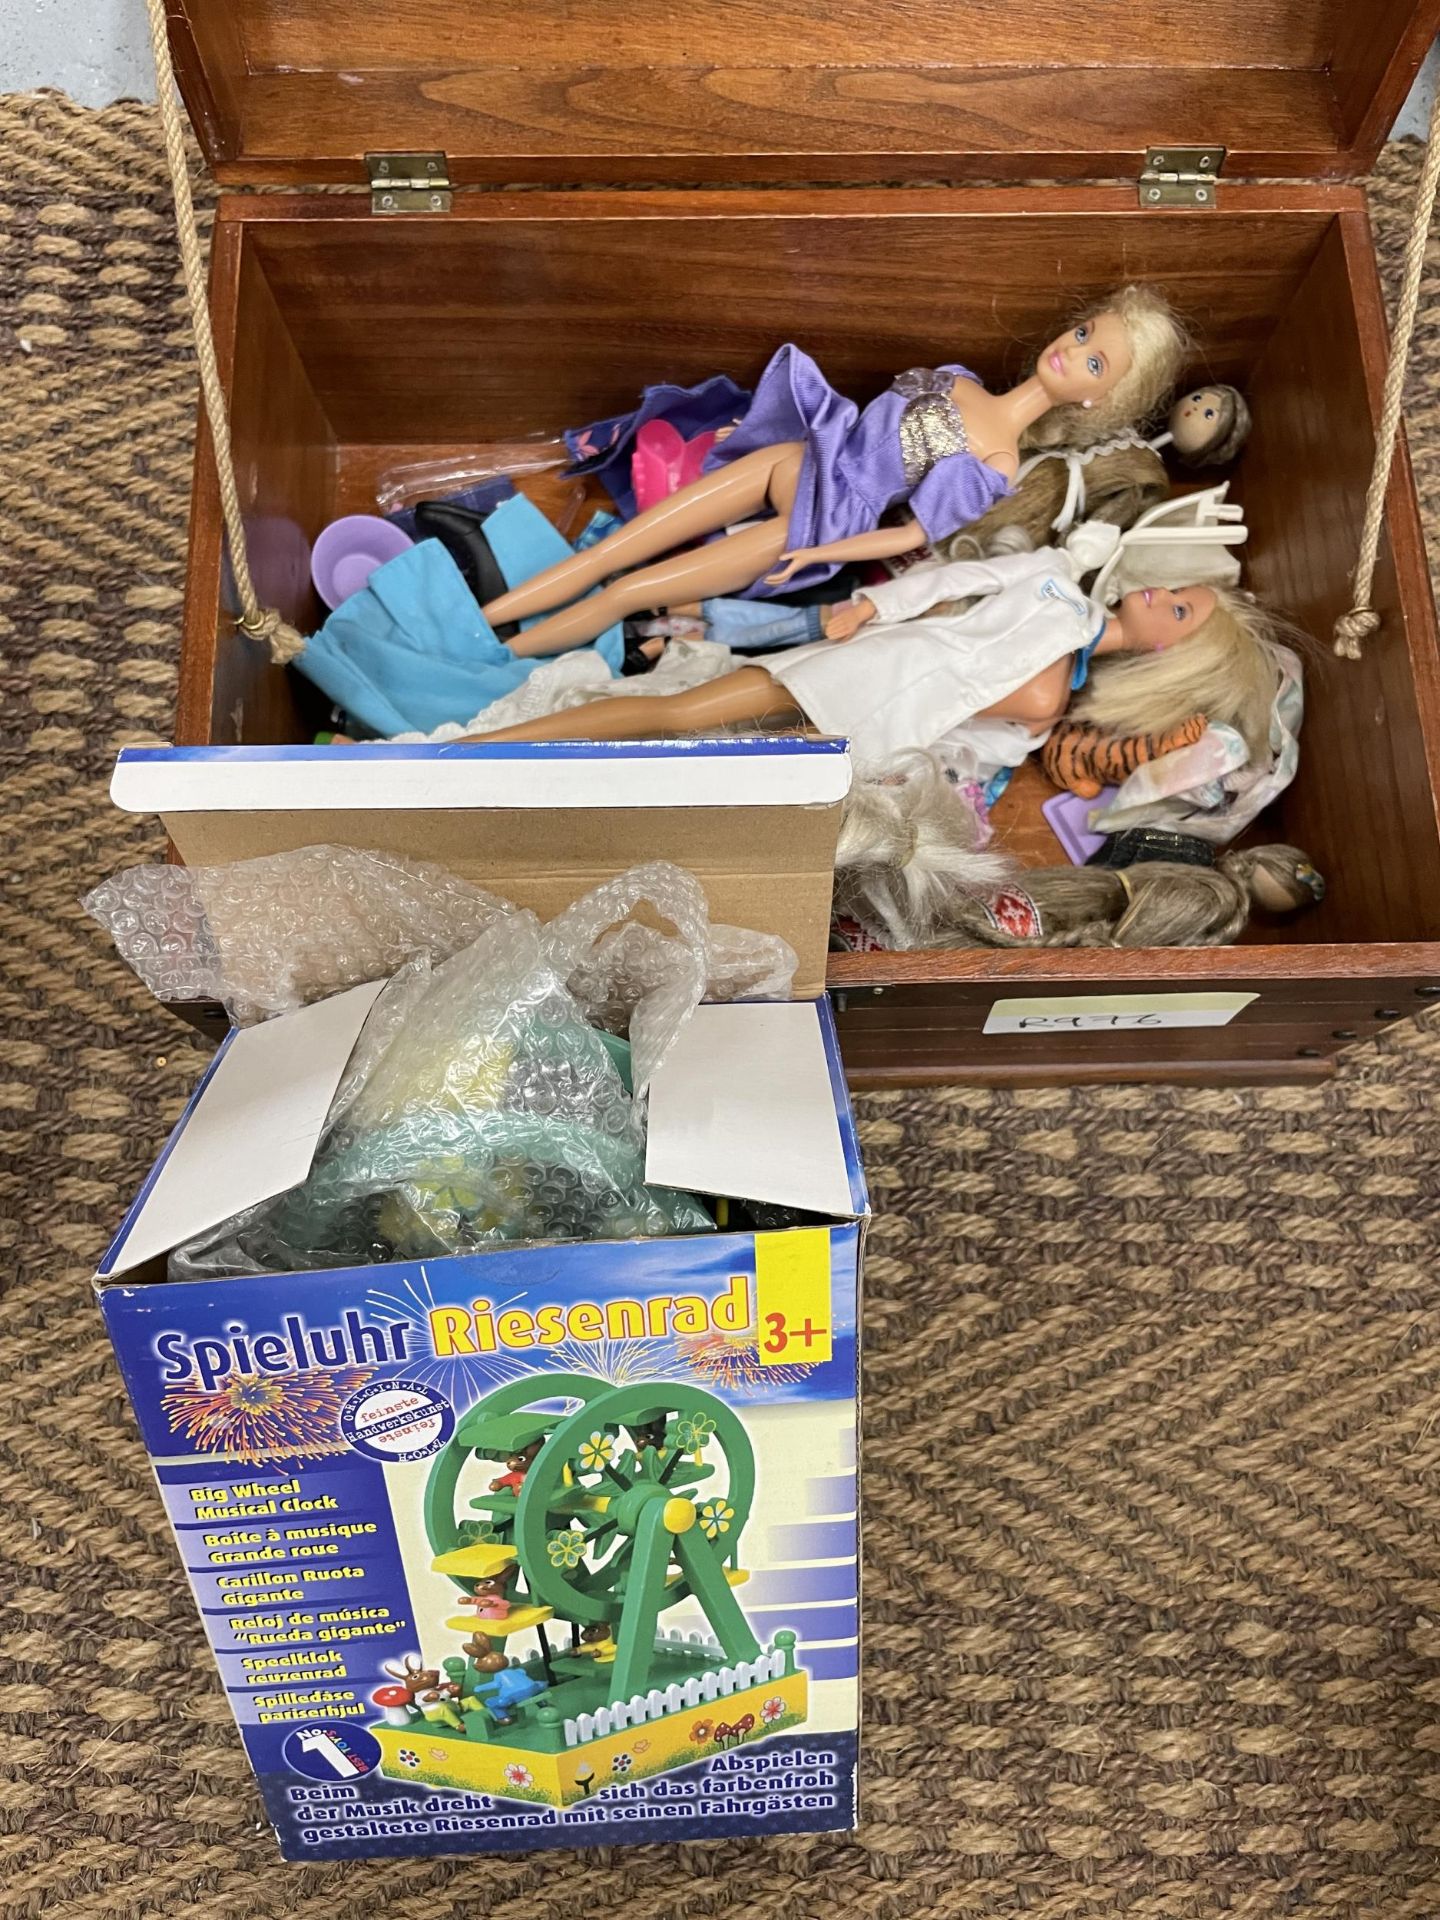 A WOODEN CHEST CONTAINING SEVERAL DOLLS AND CLOTHES INCLUDING THREE BARBIE DOLLS